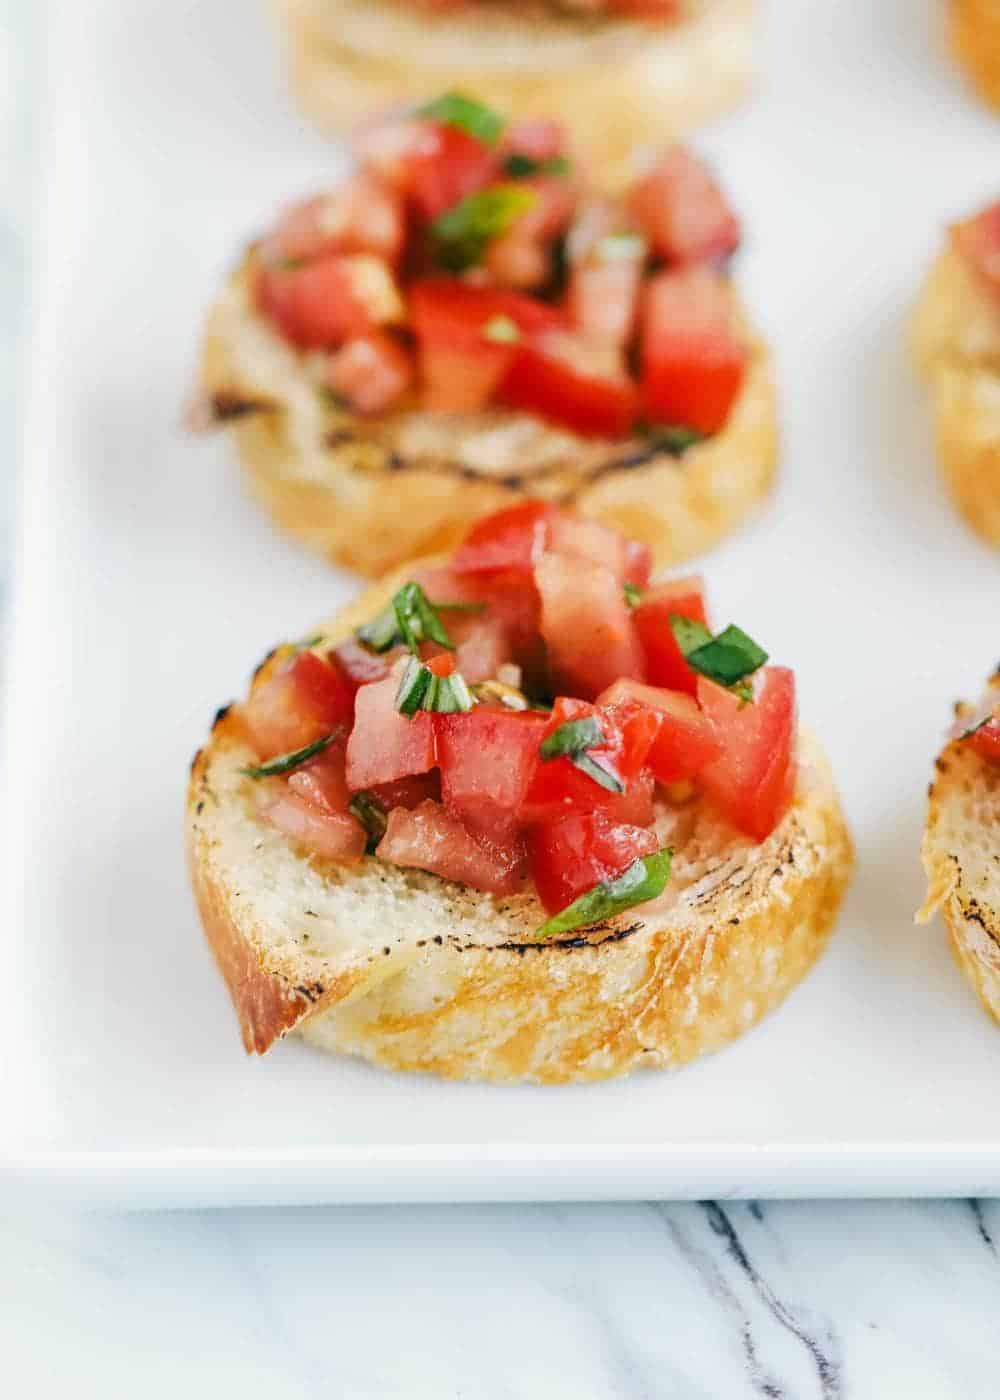 Toasted baguette topped with bruschetta.